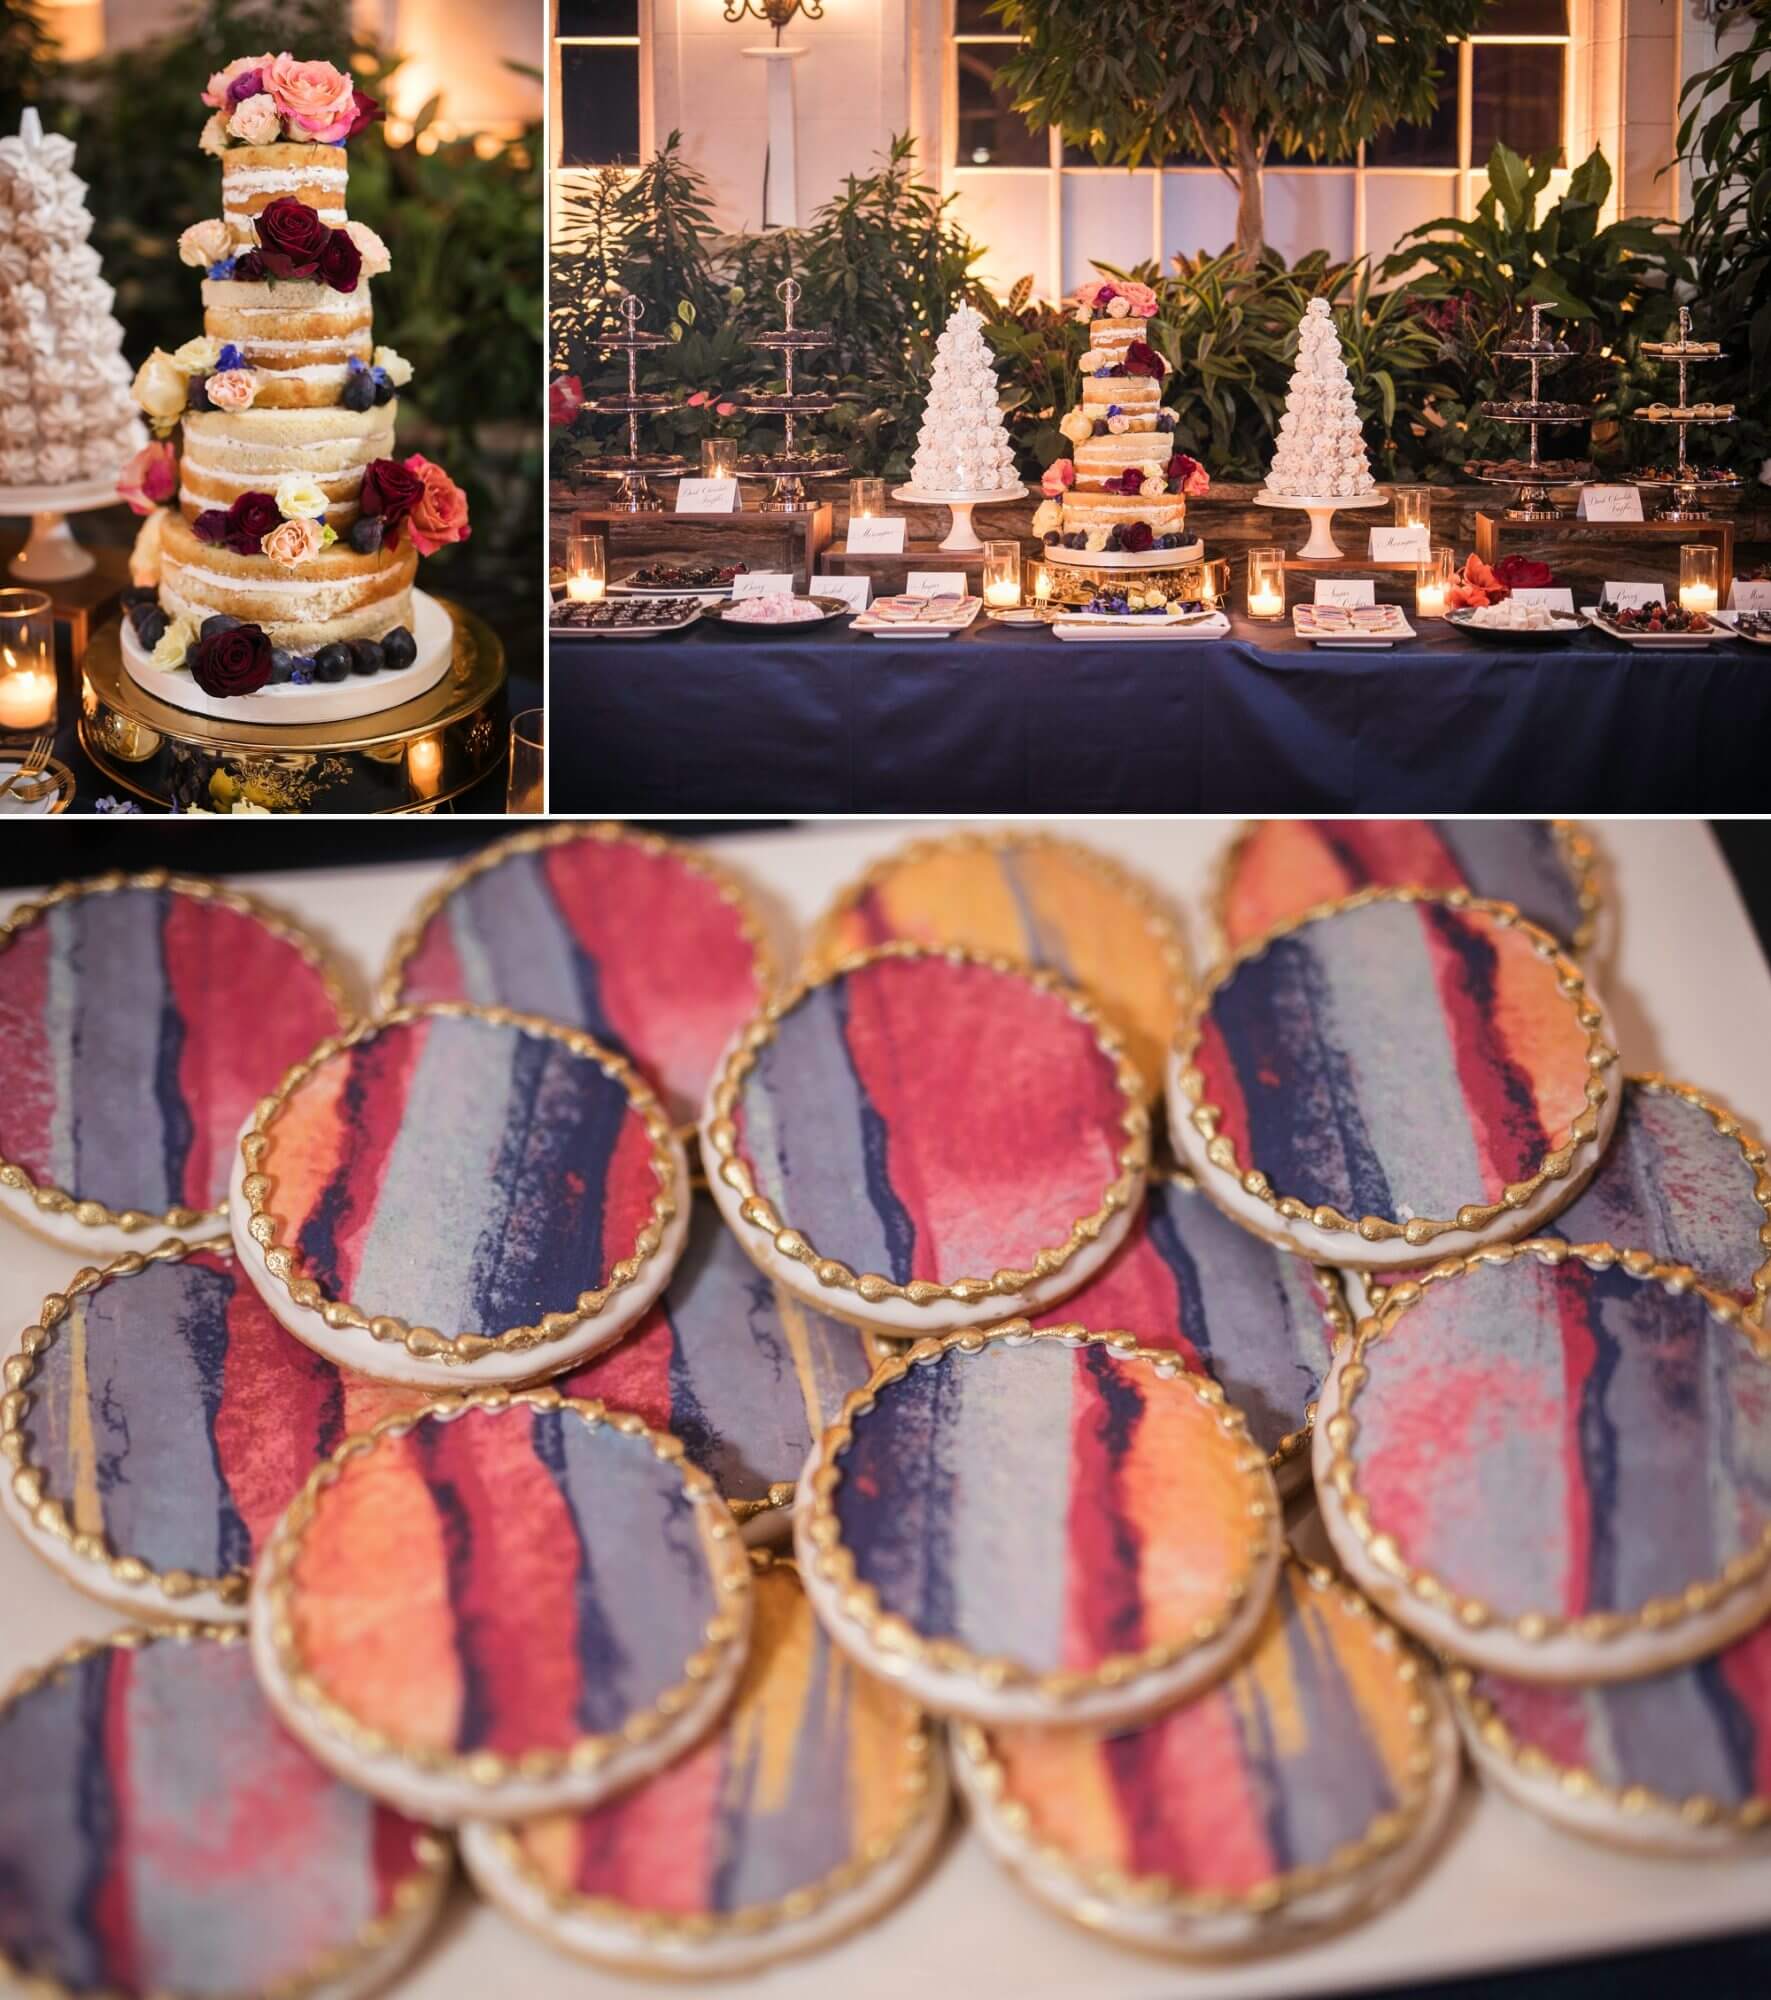 Details of the wedding cakes and cookie desserts at Casa Loma in Toronto